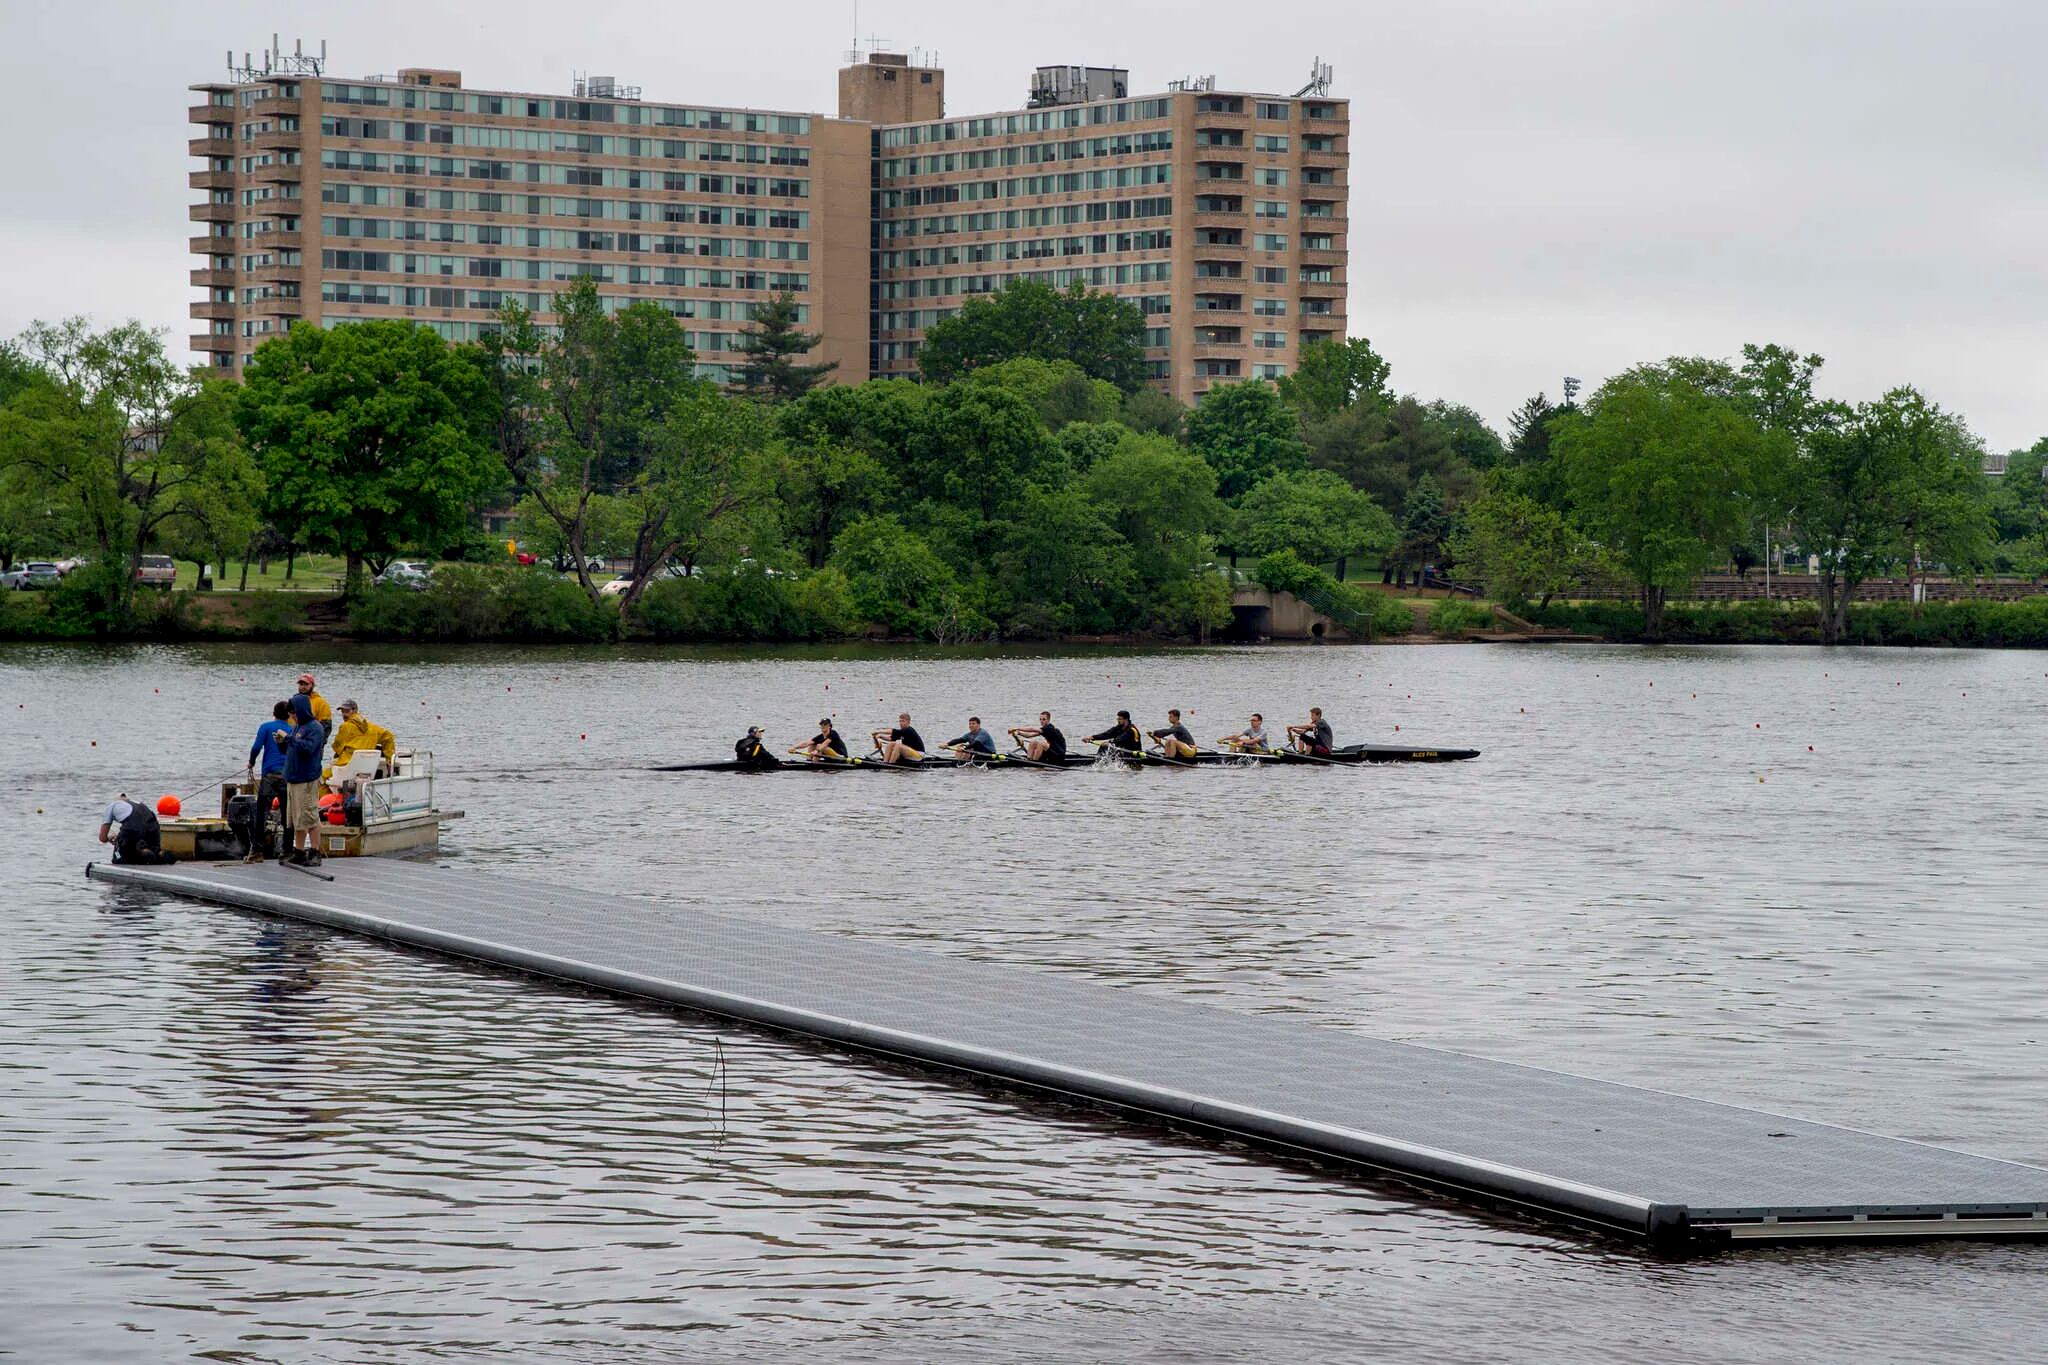 Stotesbury Cup, which draws thousands of high school rowers to